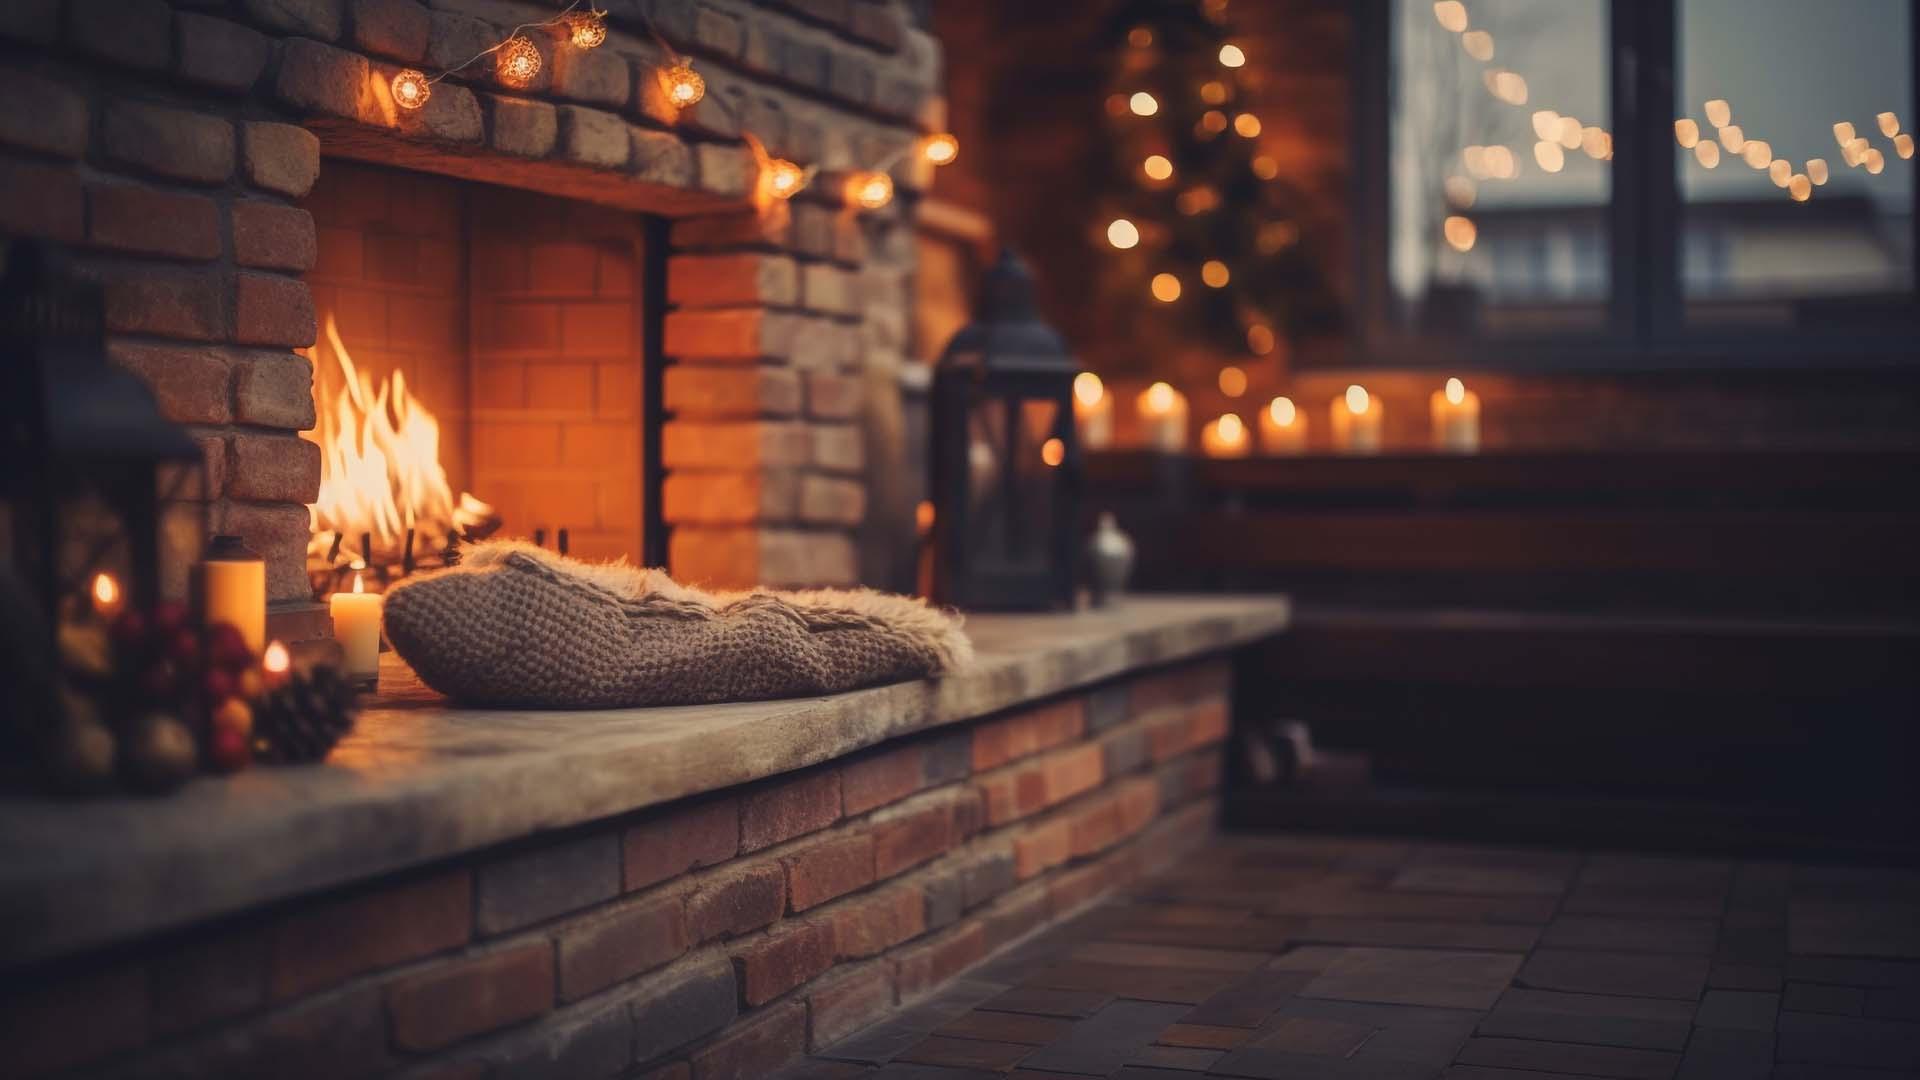 Transforming Your Home Into A Winter Wonderland With LEDs - FENLO